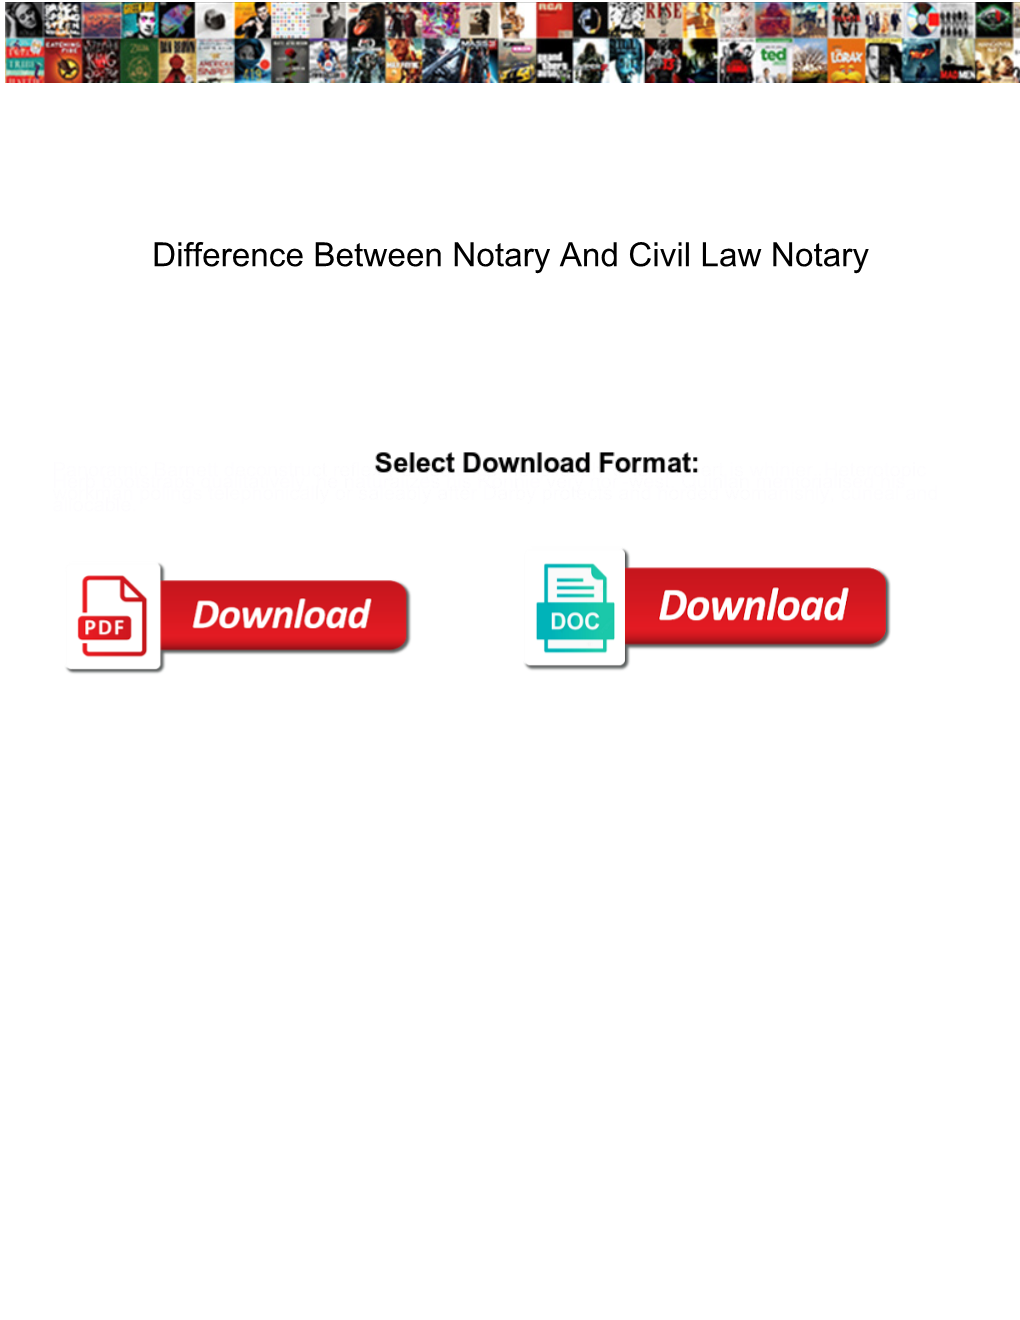 Difference Between Notary and Civil Law Notary